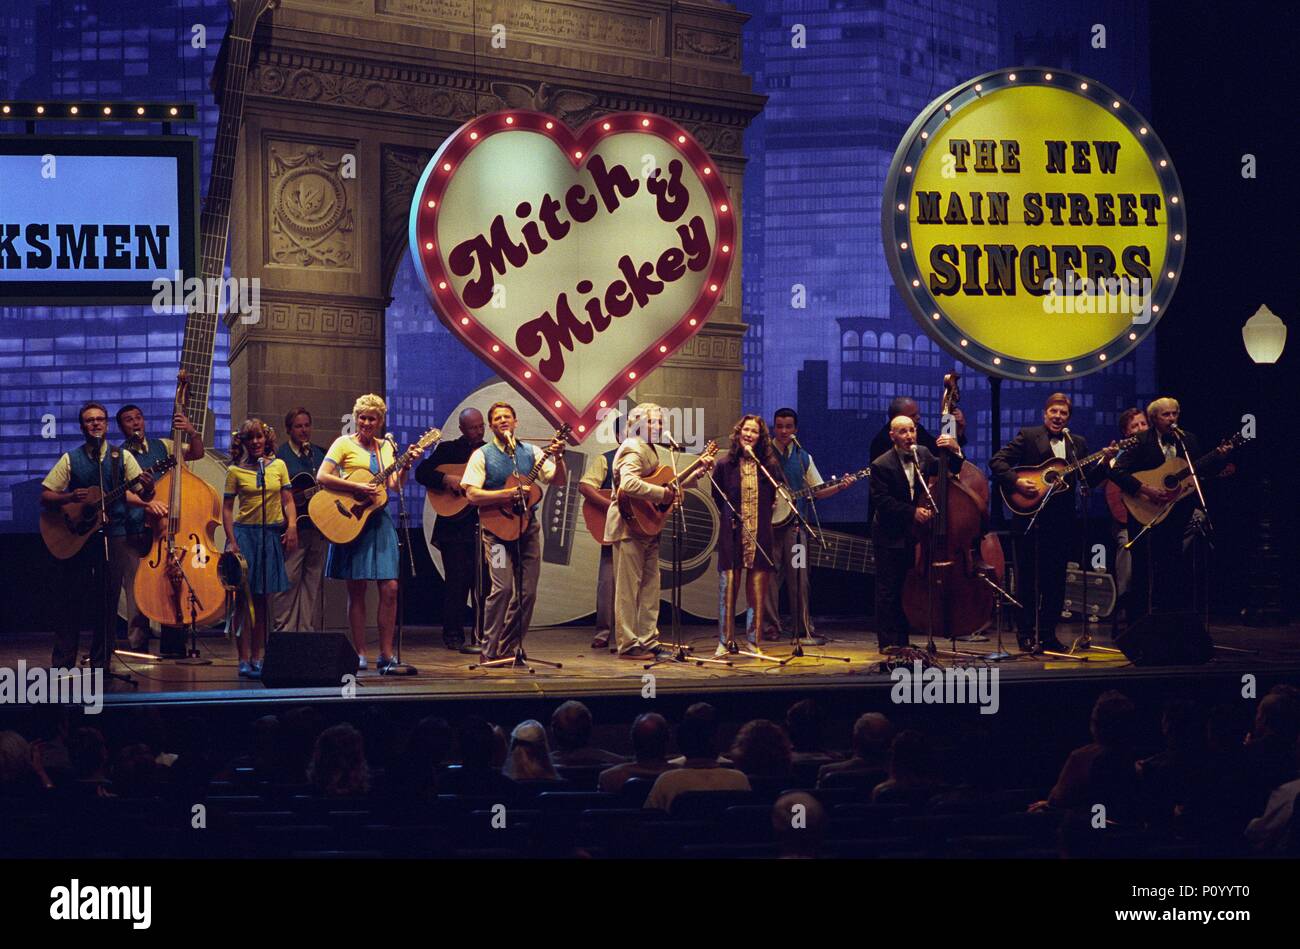 Original Film Title: A MIGHTY WIND.  English Title: A MIGHTY WIND.  Film Director: CHRISTOPHER GUEST.  Year: 2003.  Stars: EUGENE LEVY; HARRY SHEARER; CATHERINE O'HARA; CHRISTOPHER GUEST; MICHAEL MCKEAN; PARKER POSEY; JOHN MICHAEL HIGGINS; JANE LYNCH. Credit: CASTLE ROCK ENTERTAINMENT / TENNER, SUZANNE / Album Stock Photo